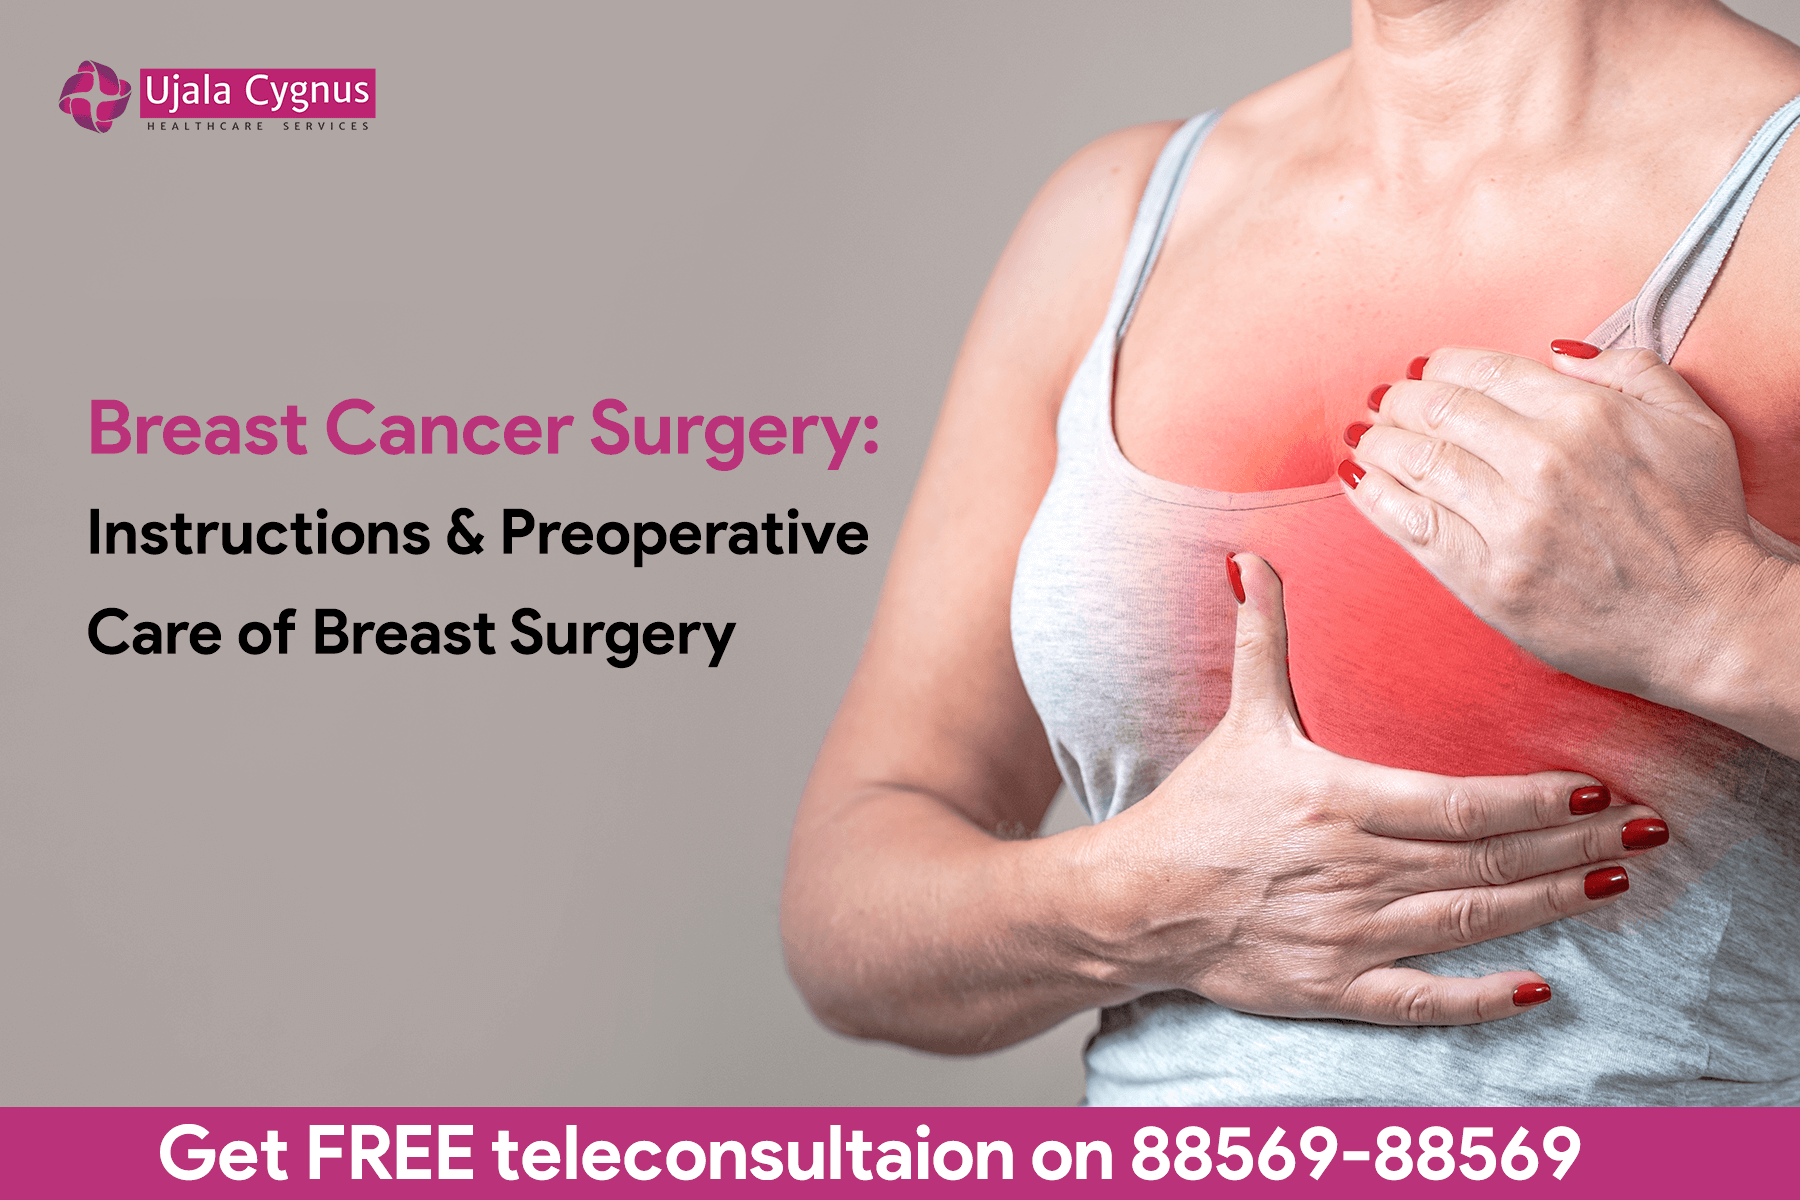 Breast Cancer Surgery: Instructions & Preoperative Care of Breast Surgery